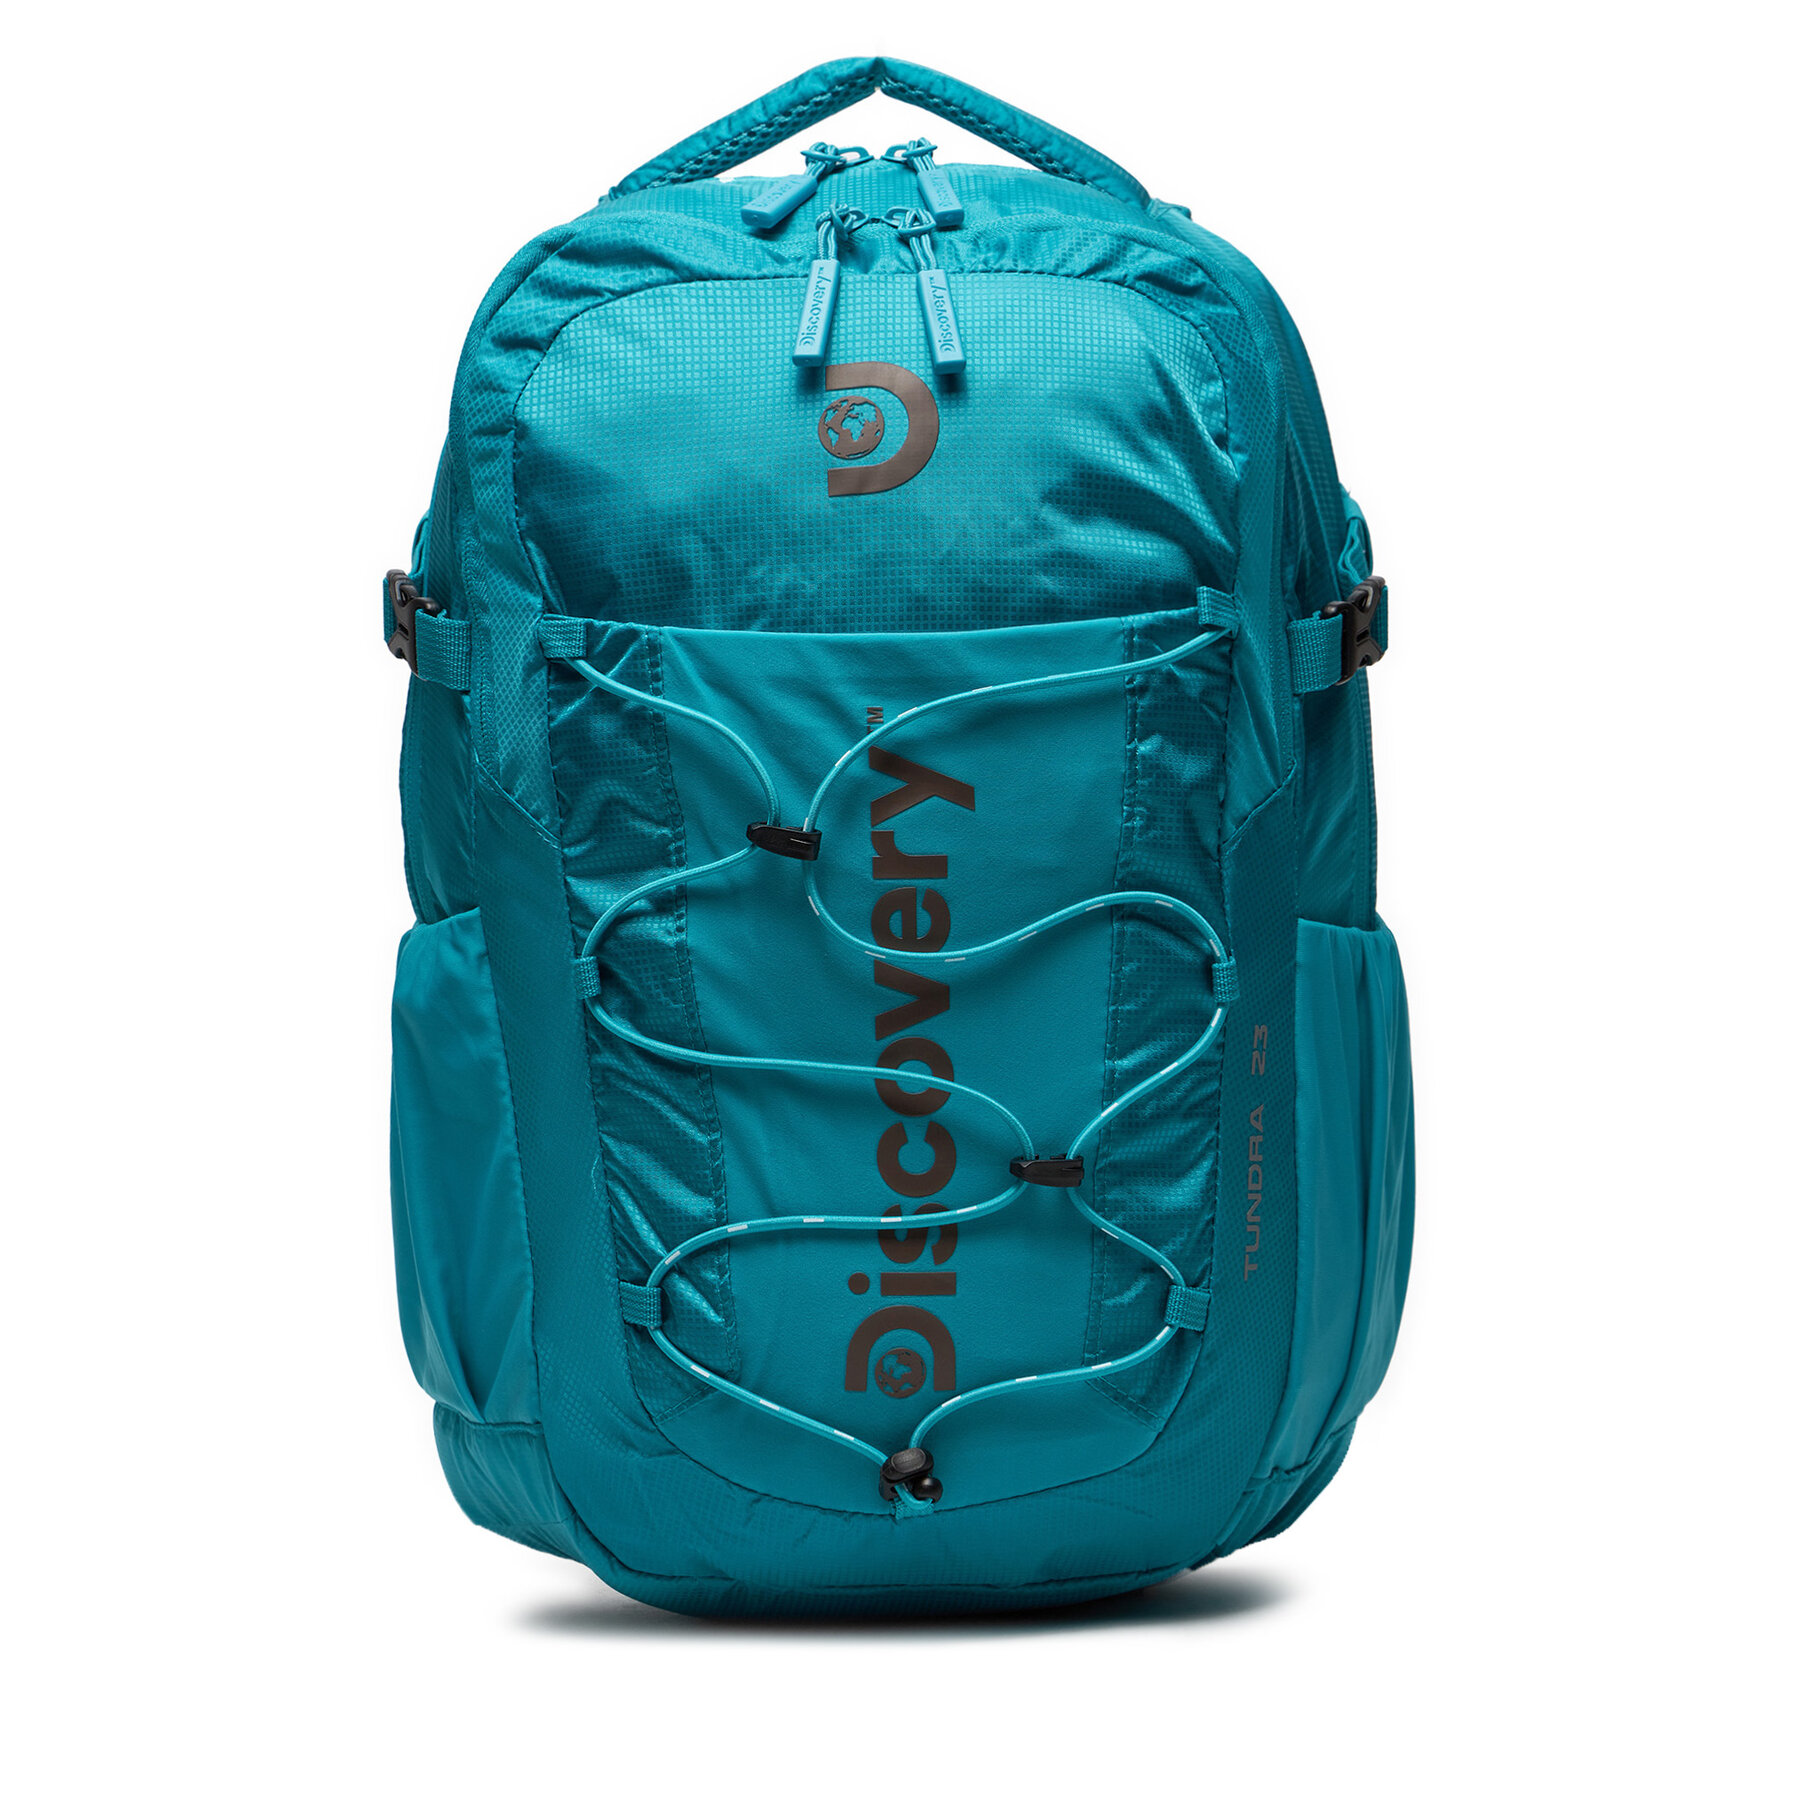 Rucksack Discovery Tundra23 Backpack D00612.39 Blue von Discovery